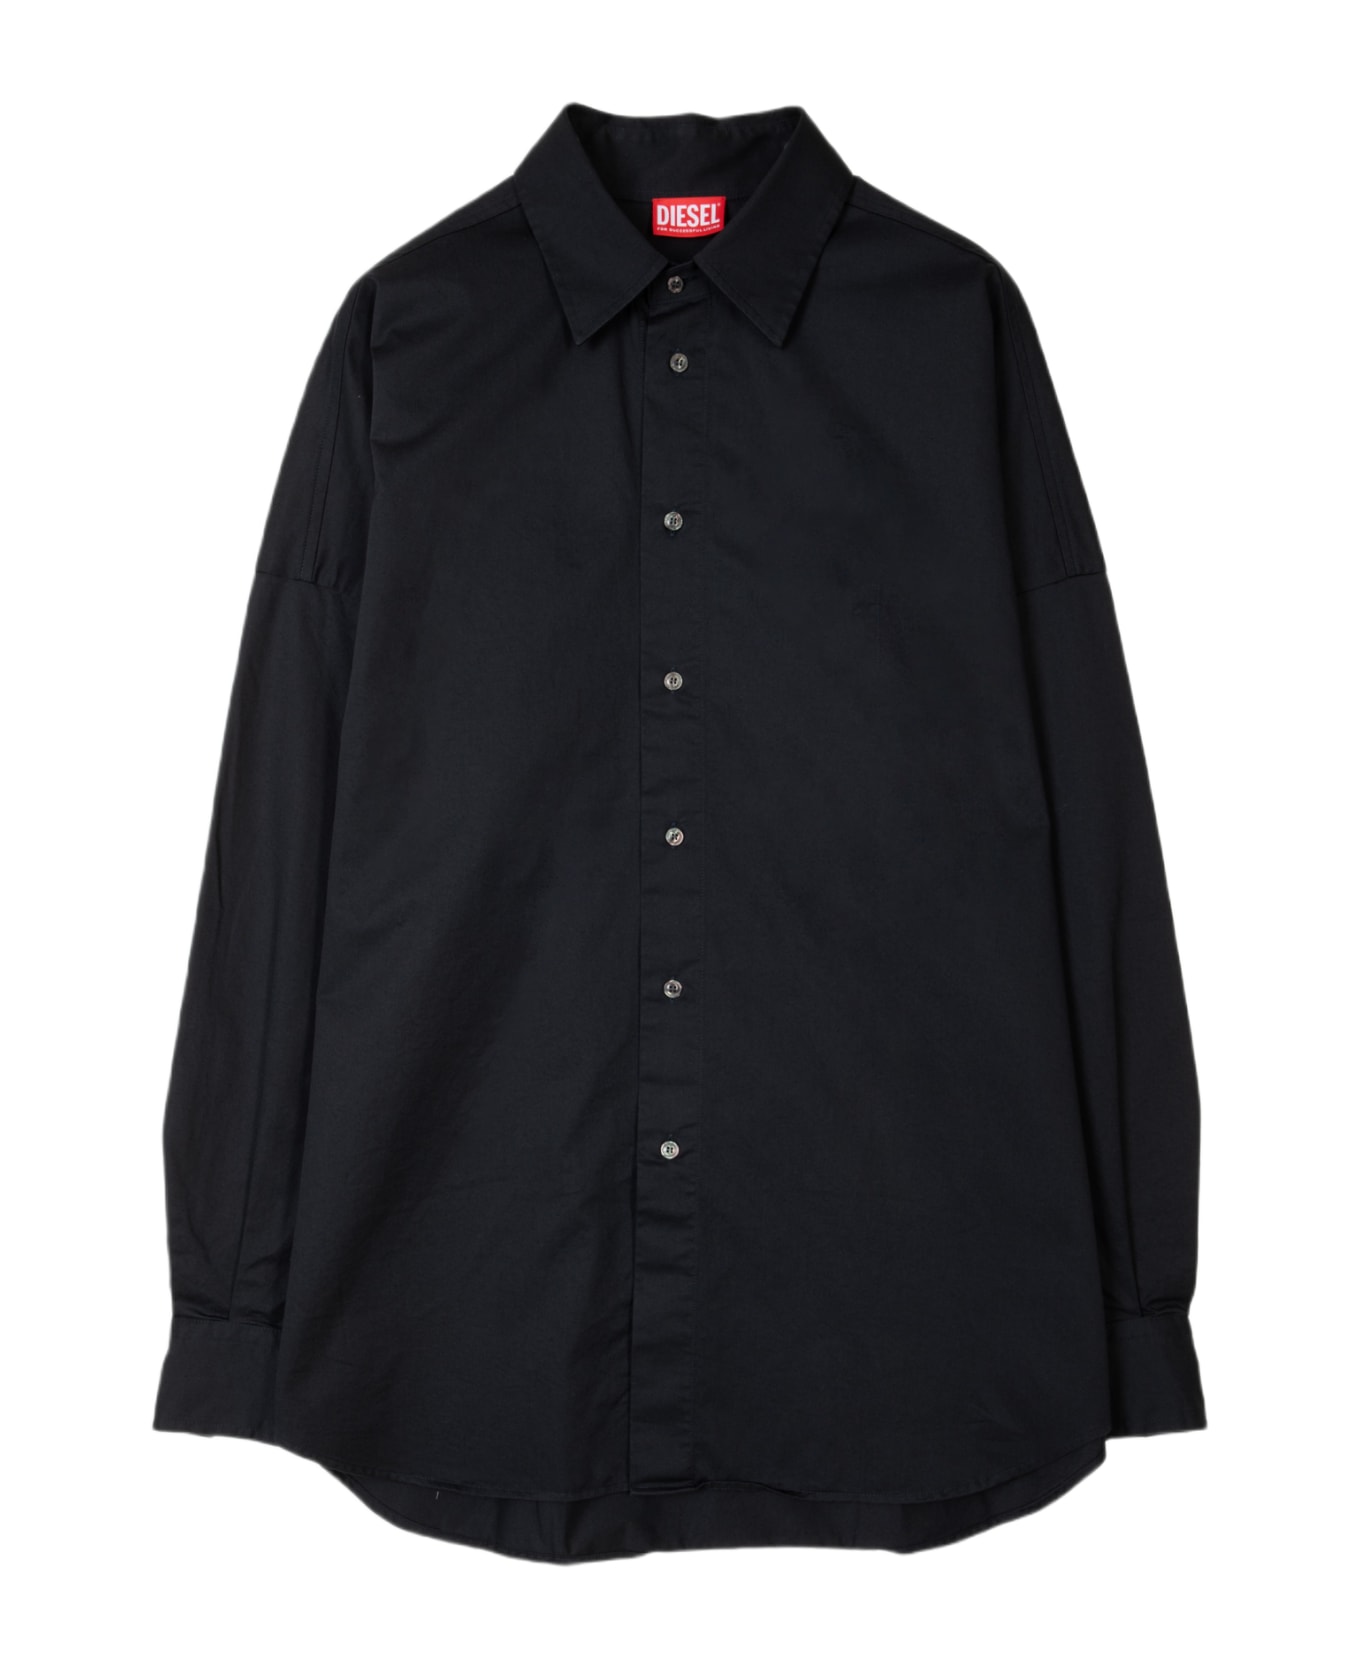 Diesel S-limo-logo Camicia Black Cotton Oversized Shirt With Oval-d Logo - S Limo Logo - Nero